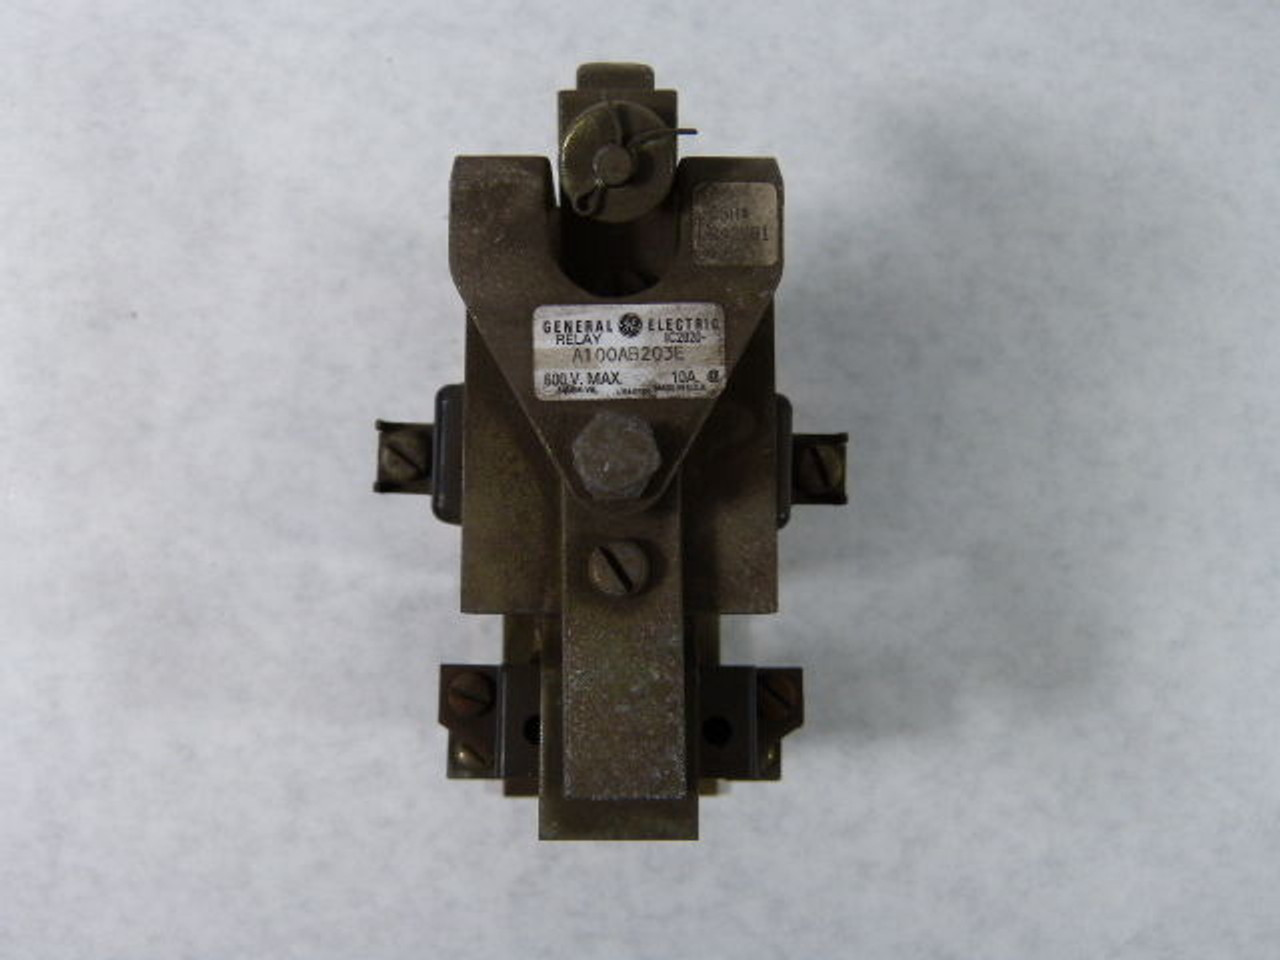 General Electric IC-2820-A100AB203E Time Delay Relay 10A 600V 115VAC CoilUSED